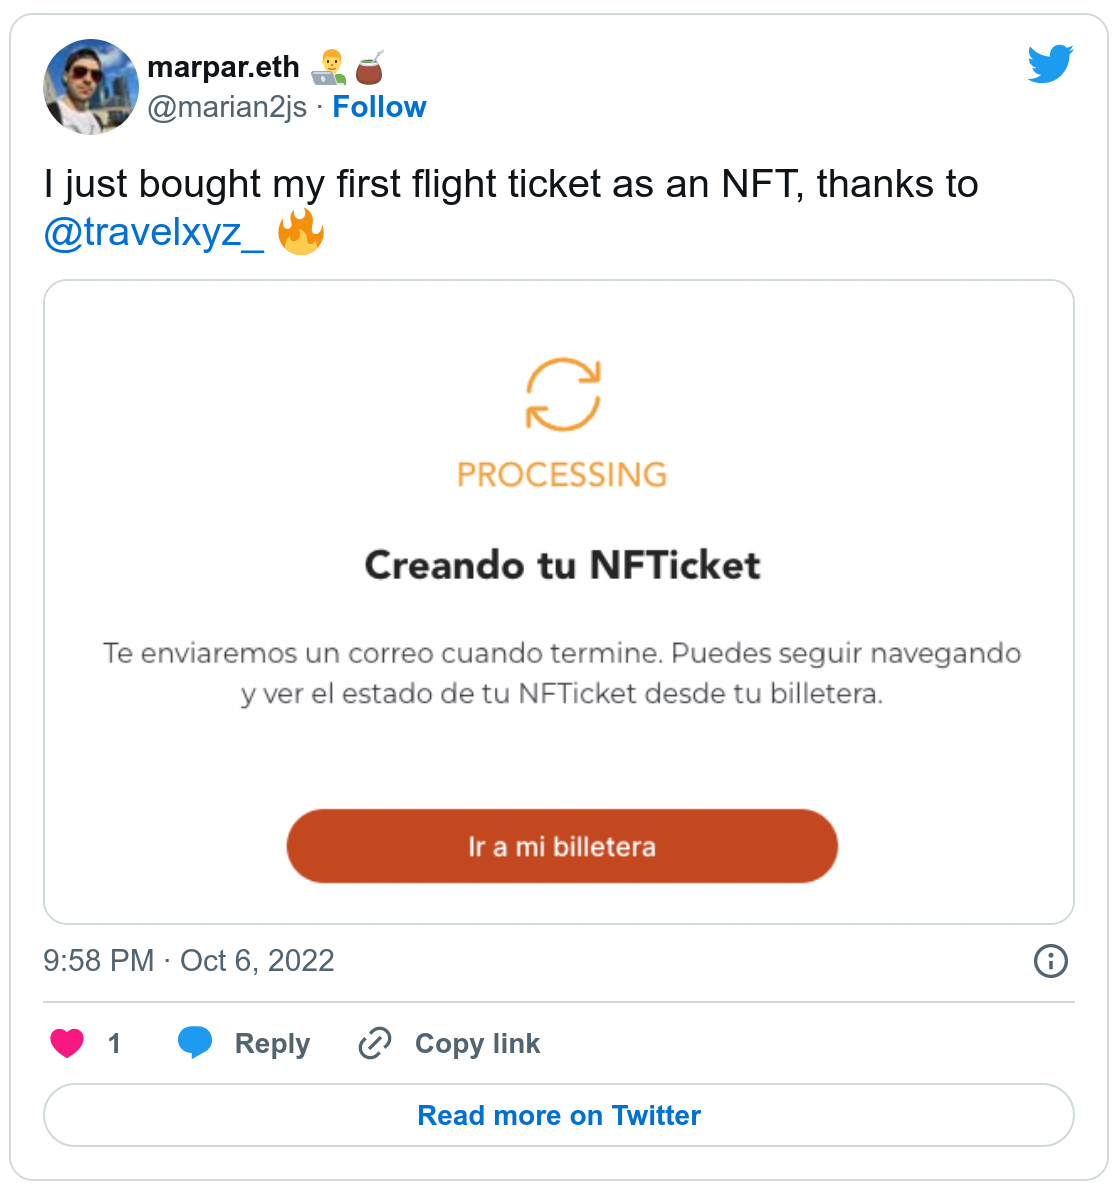 Tweet by @marian2js that says: I just bought my first flight ticket as an NFT, thanks to @travelxyz_ fire emoji